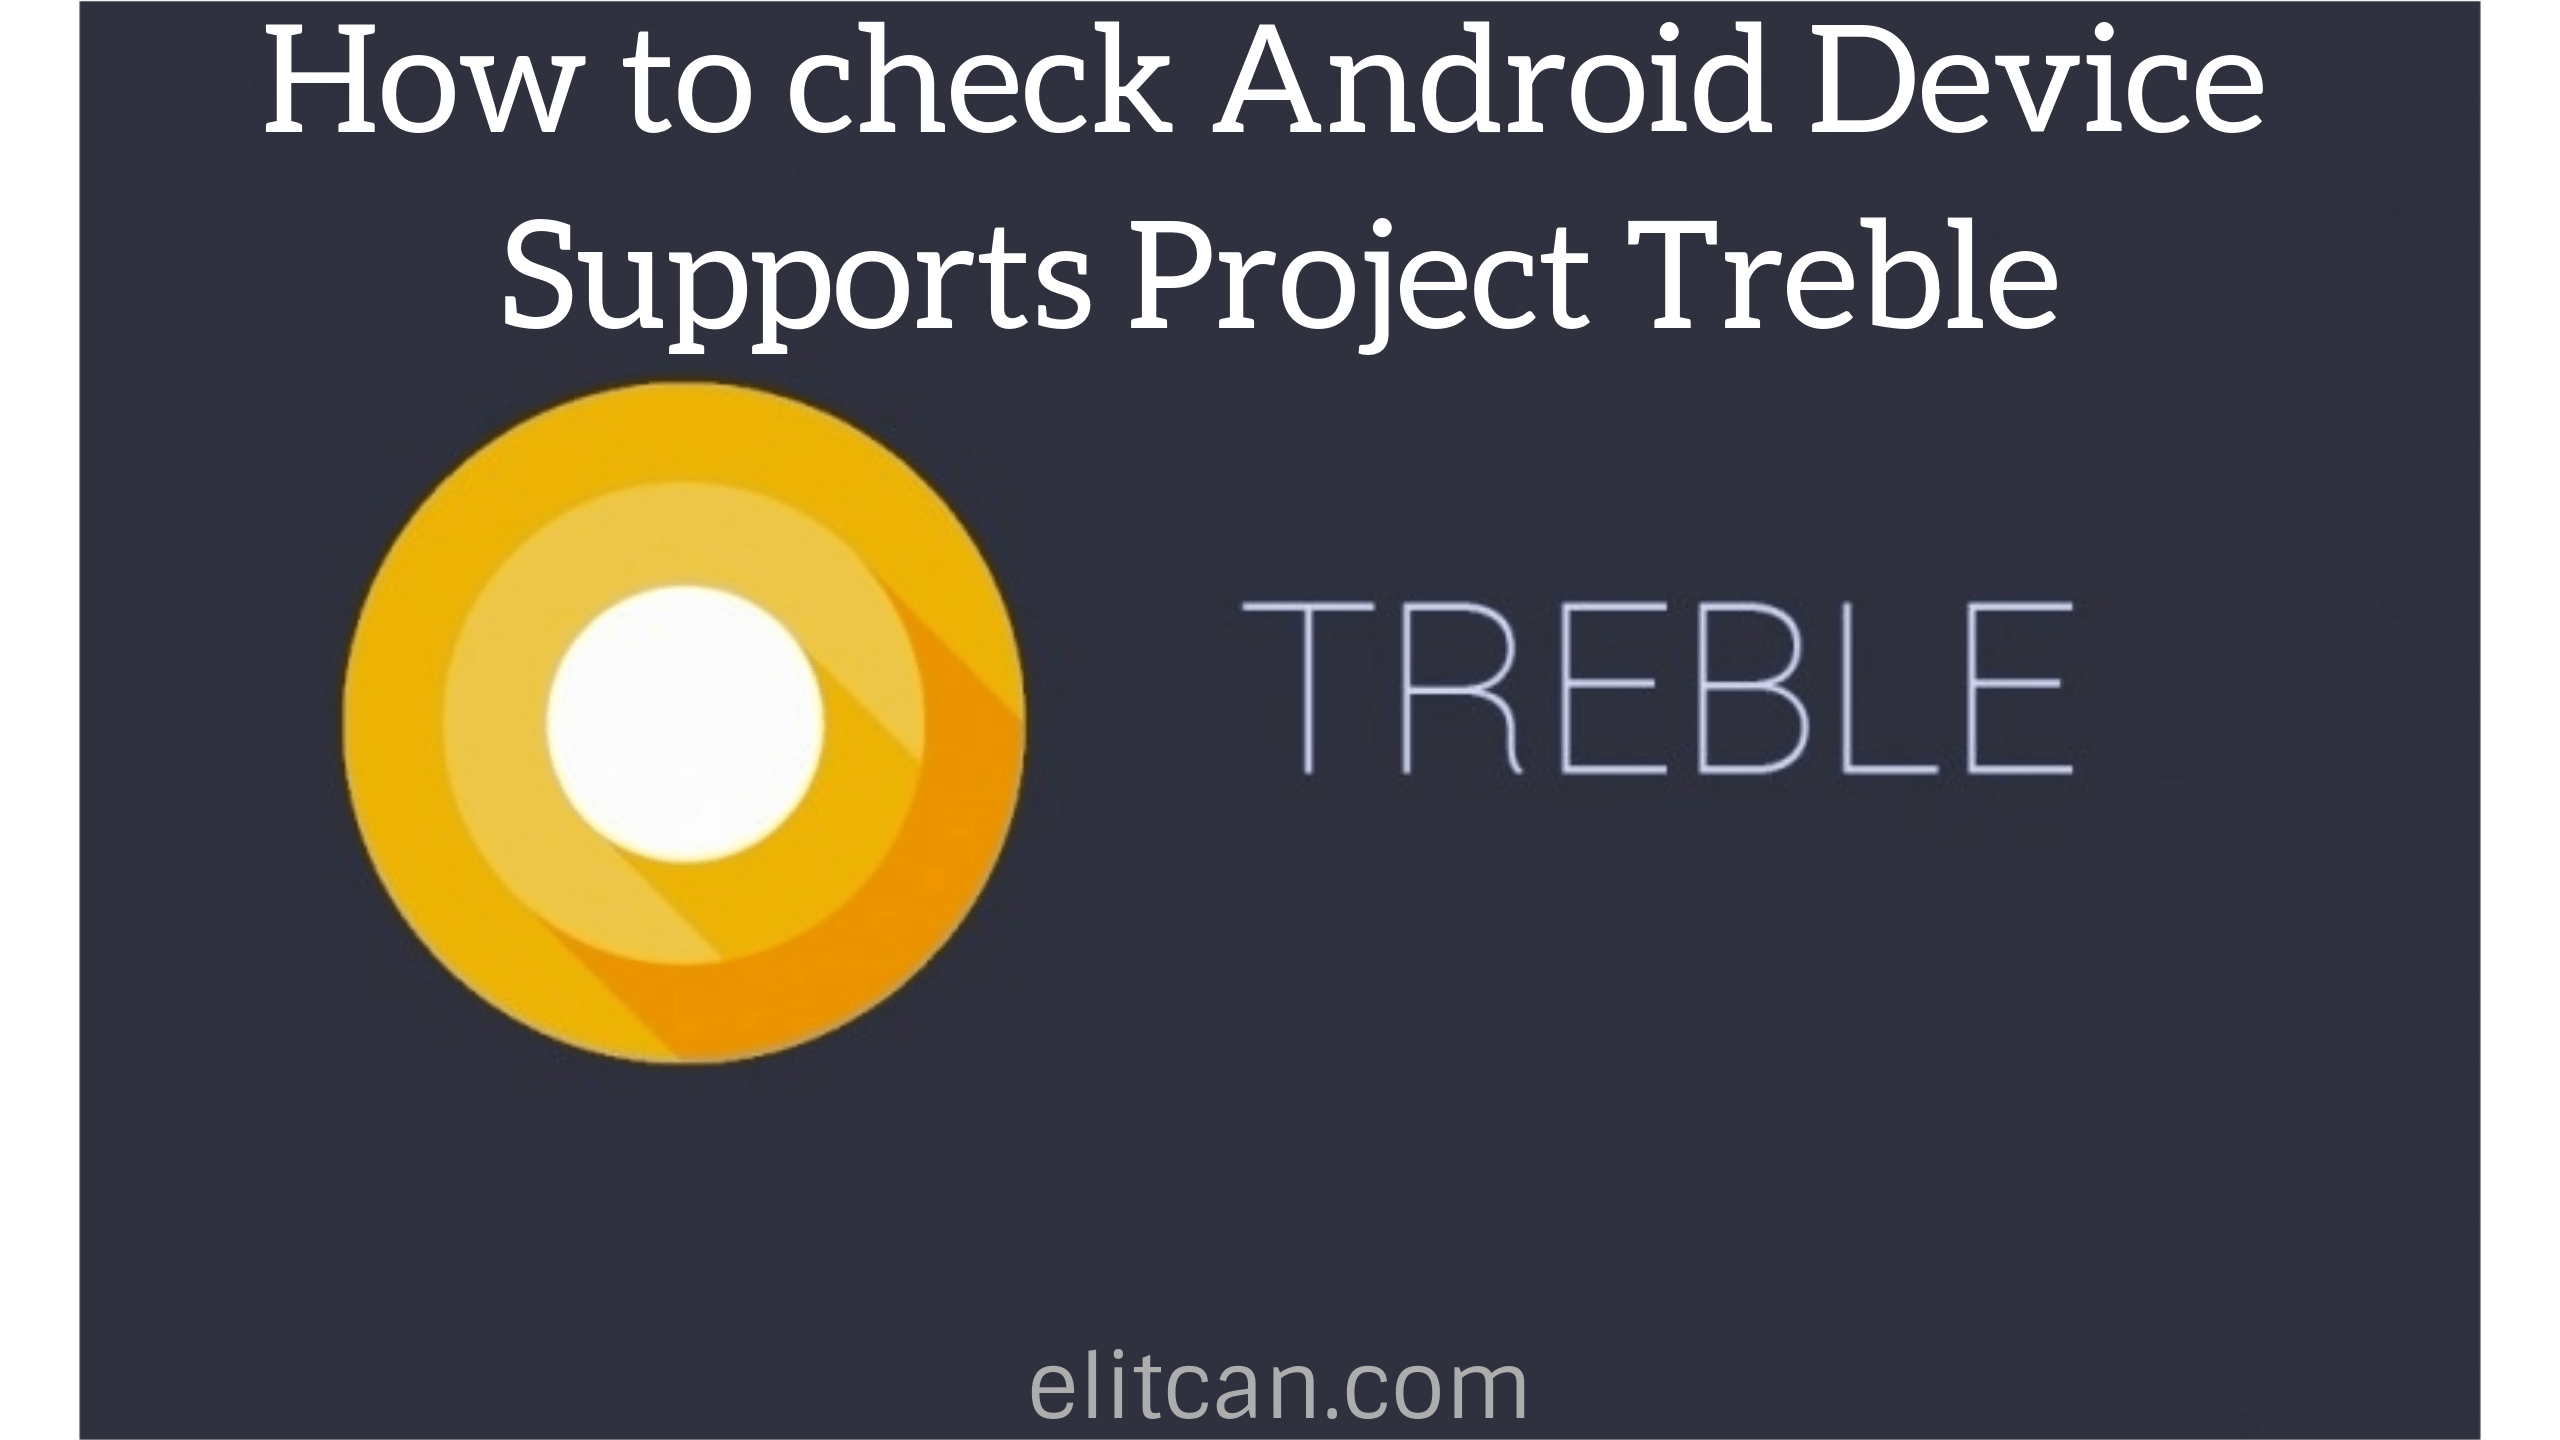 How to check Android Device Supports Project Treble